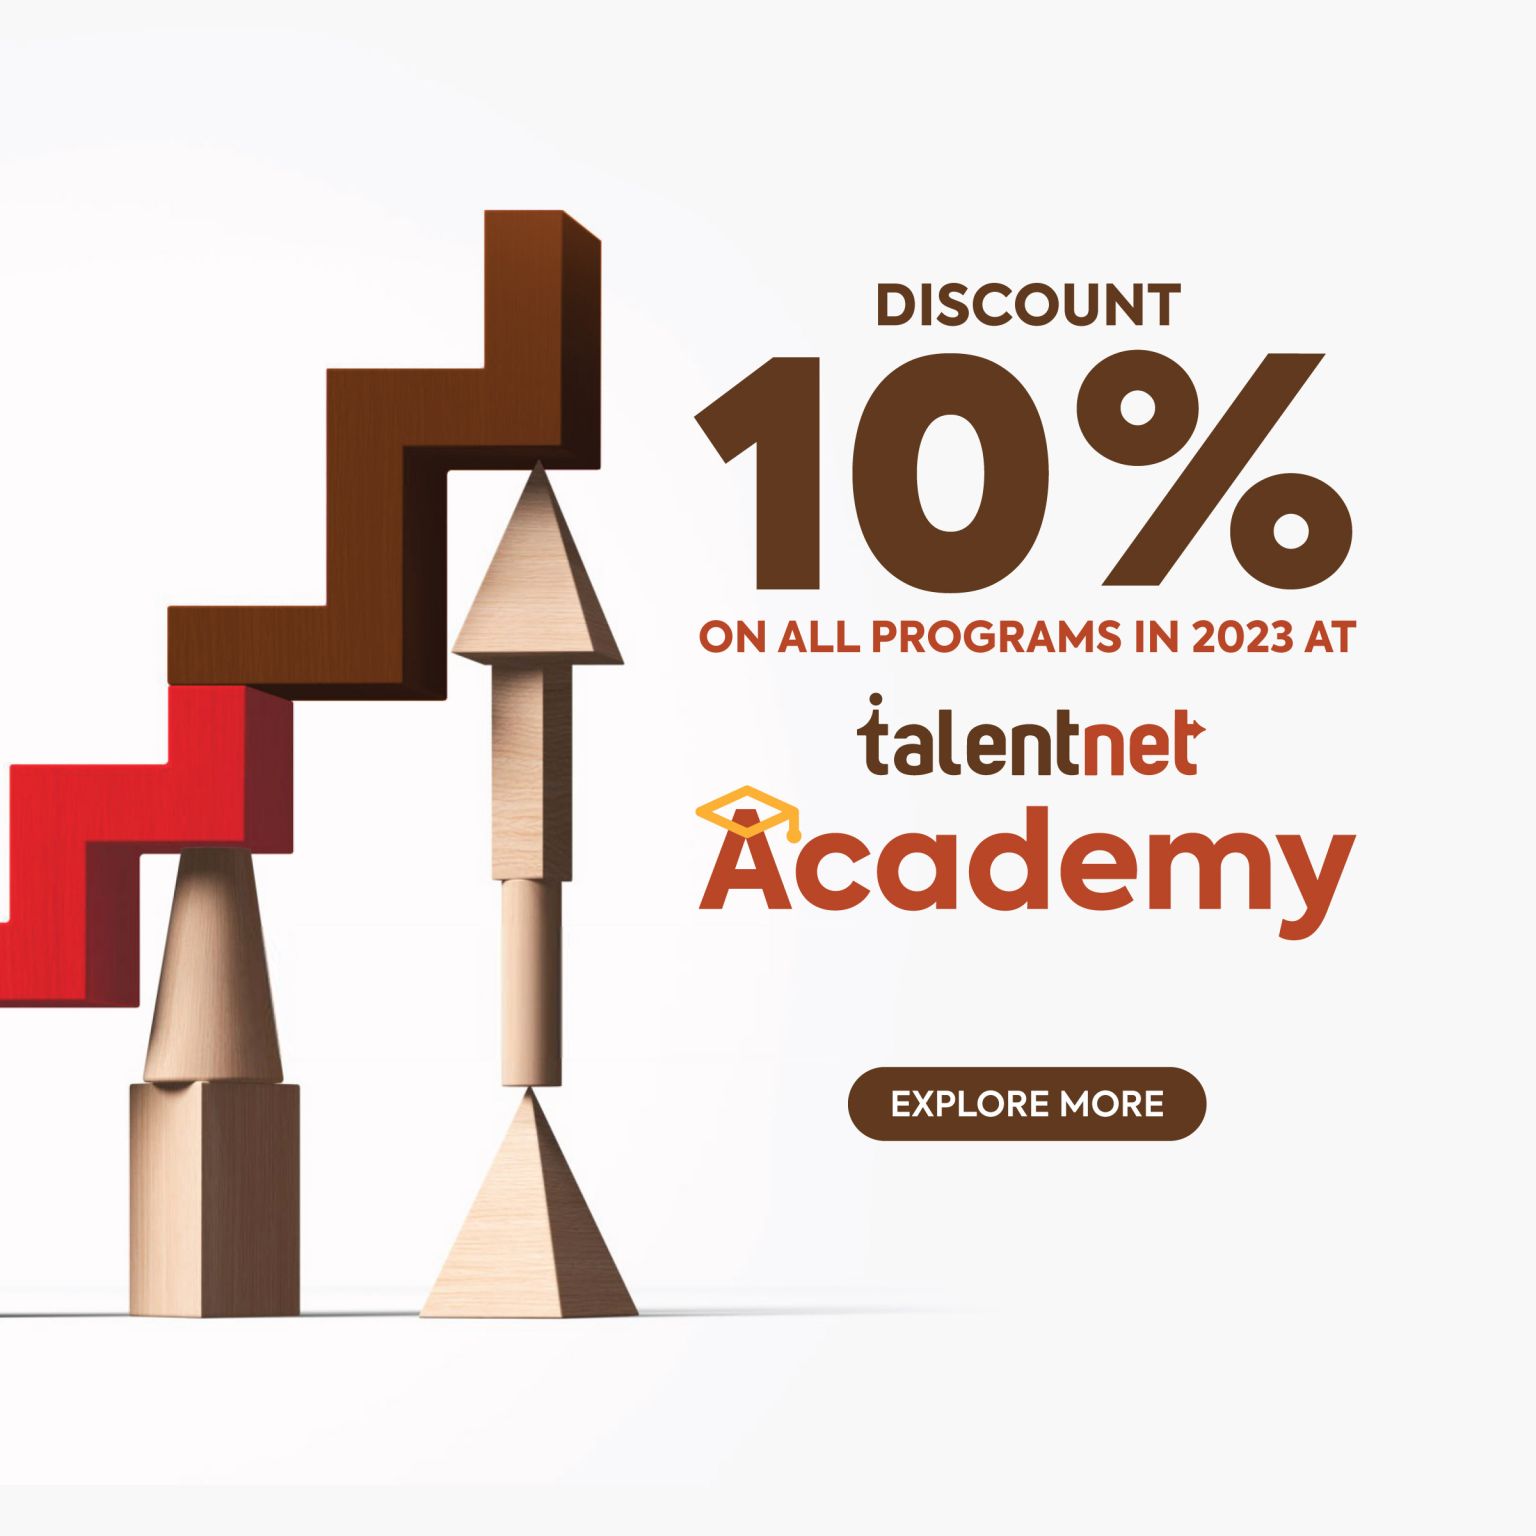 DISCOUNT OF 10% FOR ALL PROGRAMS IN 2023 AT TALENTNET ACADEMY​

Skyrocket your career path with an in-depth view of the HR industry and numerous differences to explore at Talentnet Academy: